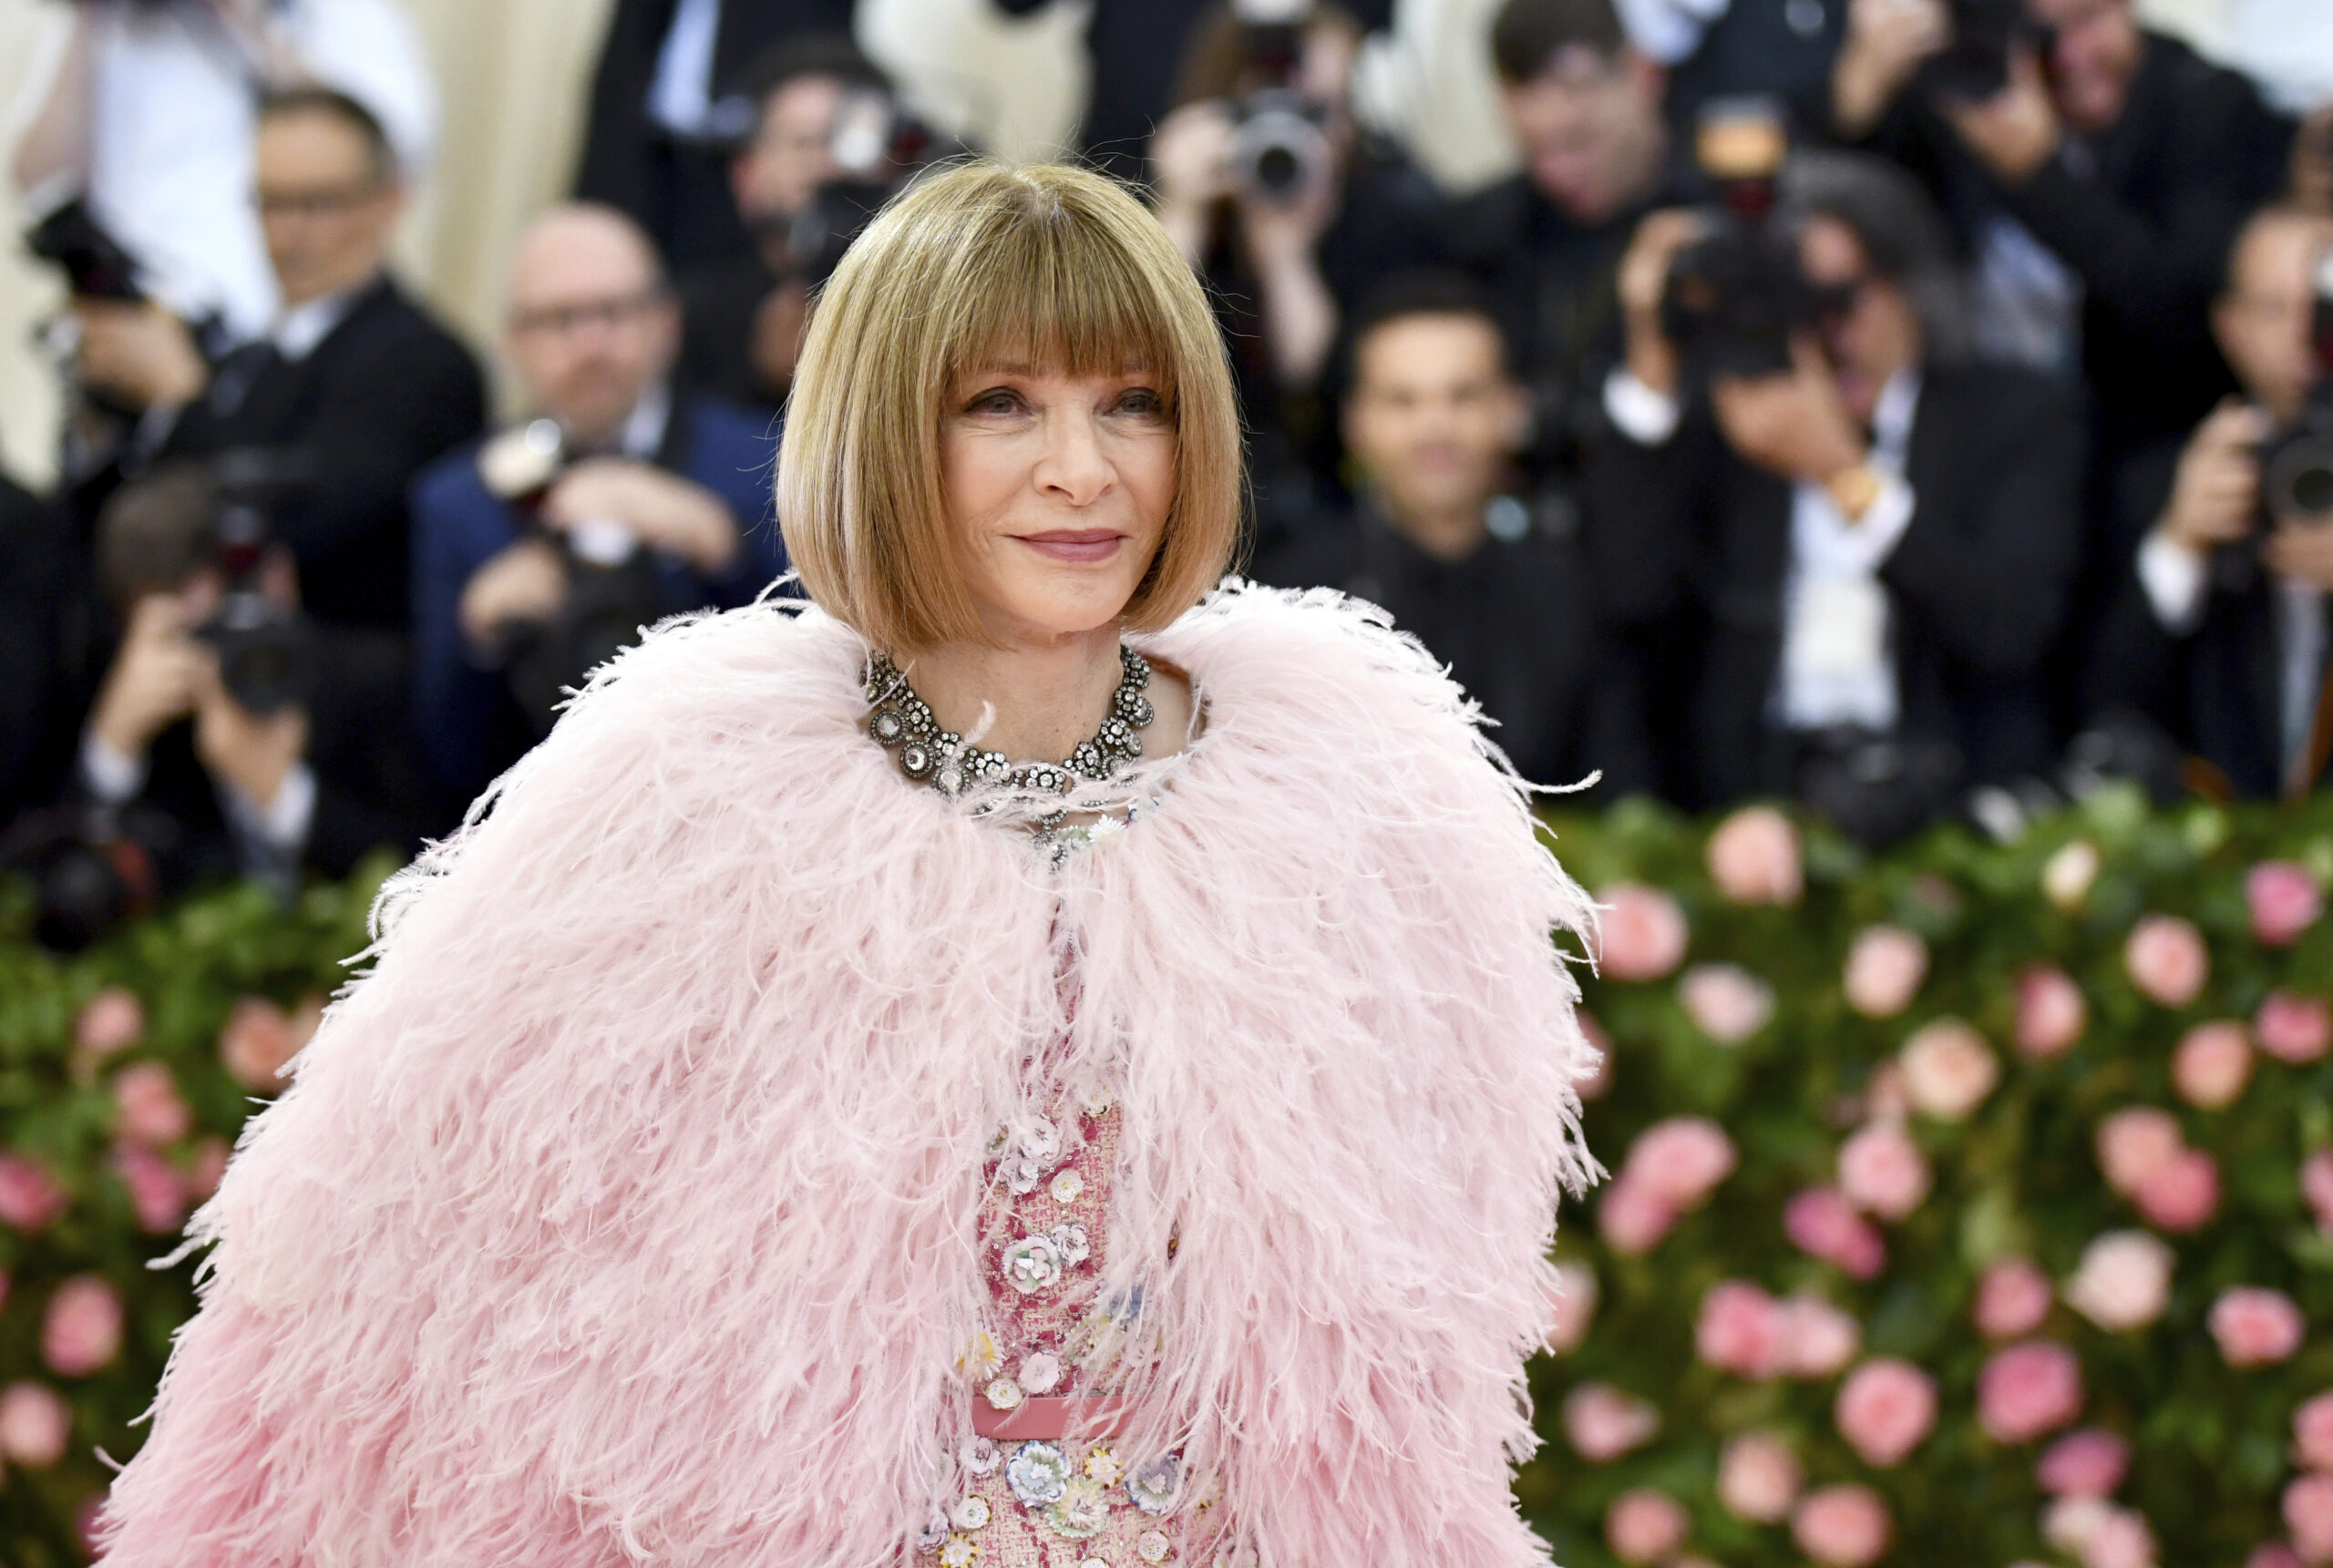 Vogue editor Anna Wintour attends The Metropolitan Museum of Art's Costume Institute benefit gala celebrating the opening of the "Camp: Notes on Fashion" exhibition on May 6, 2019, in New York.